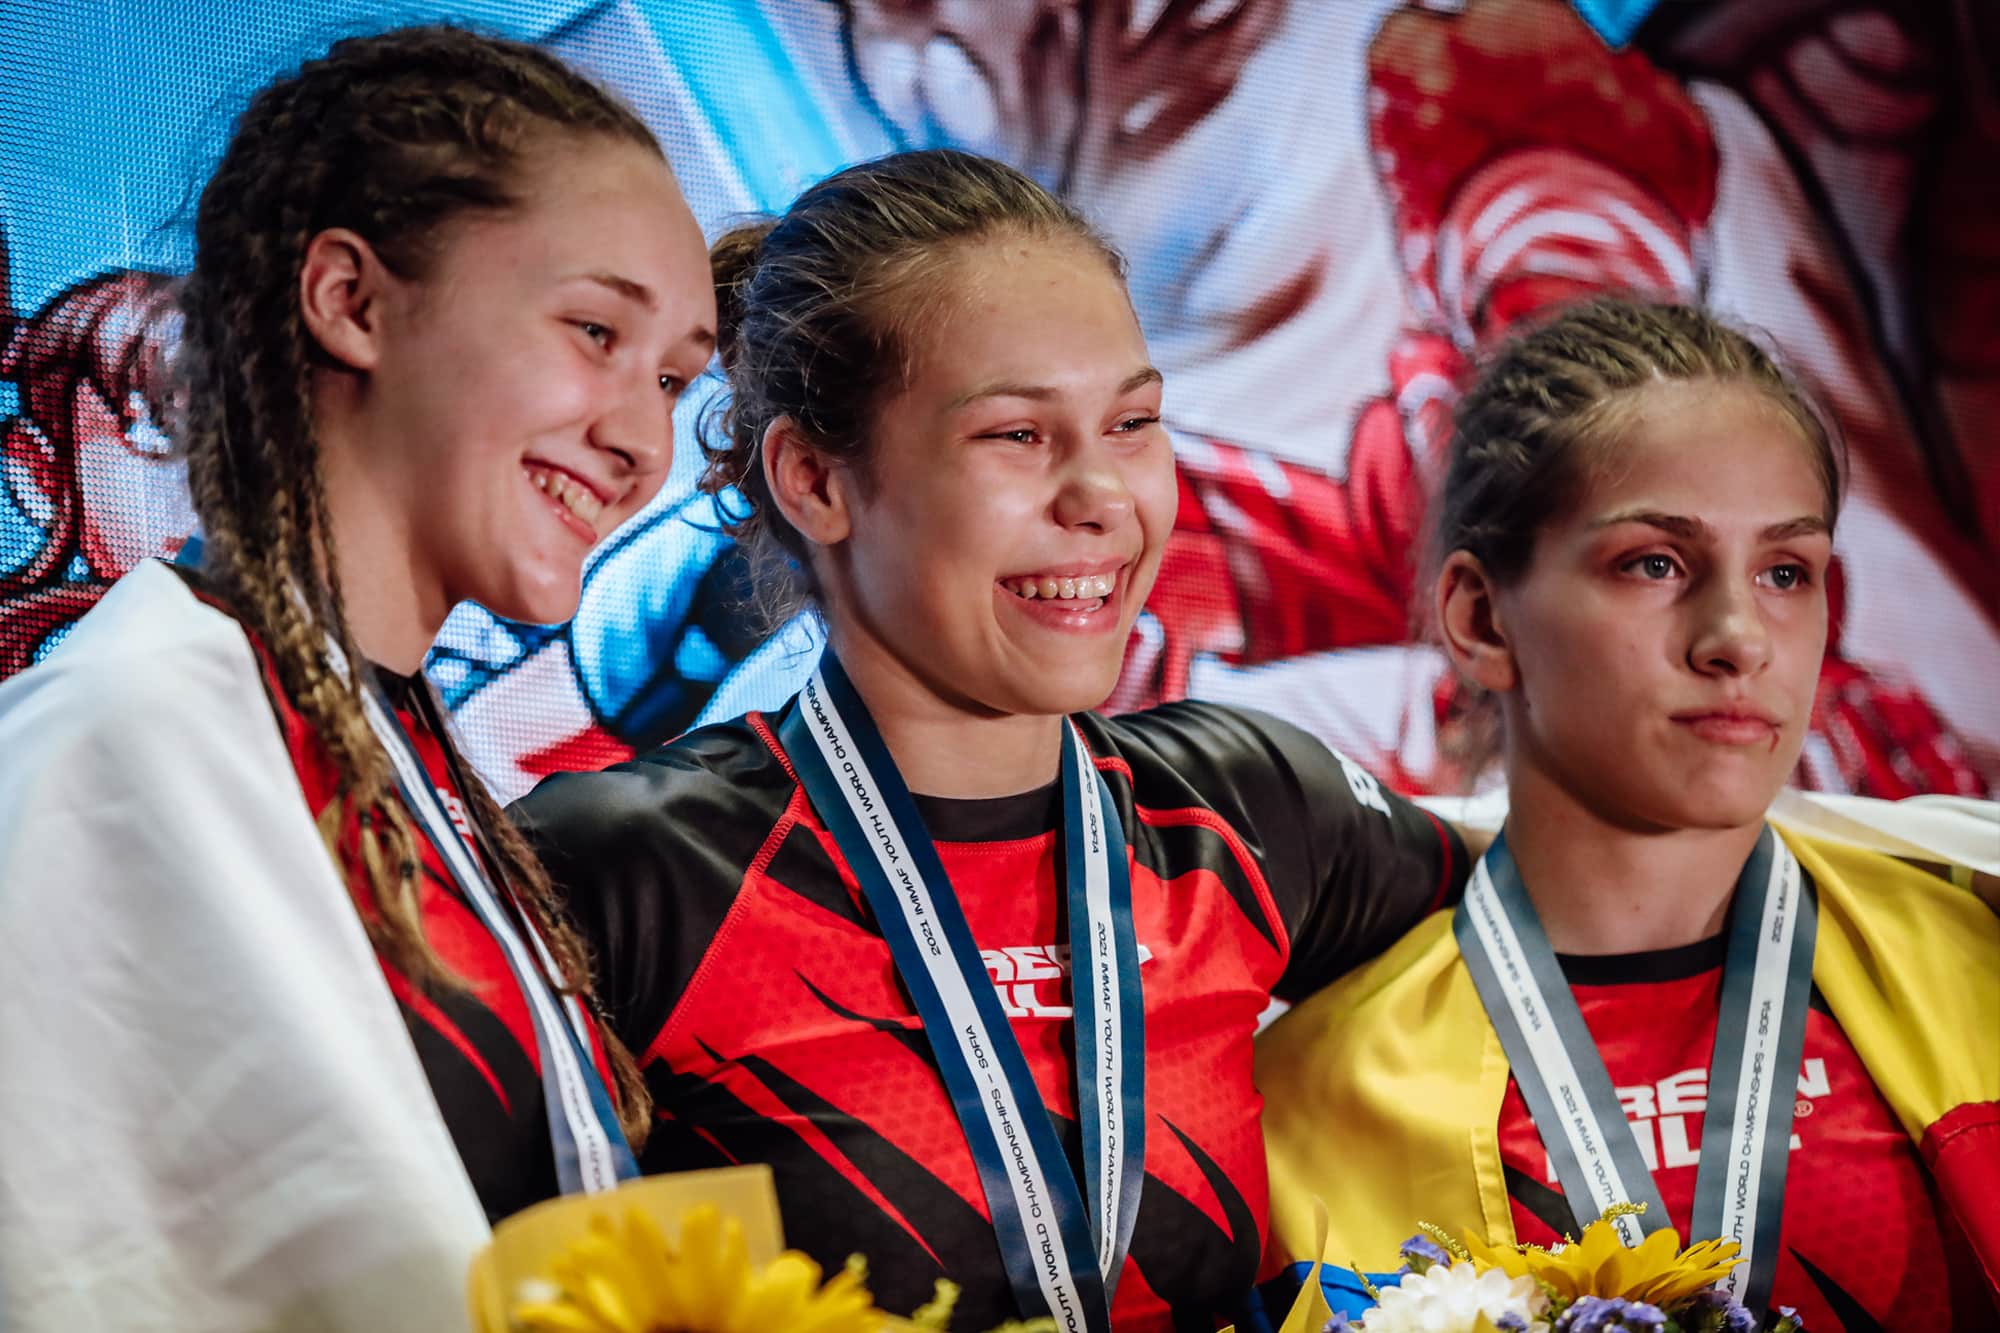 Featherweight queen Slavka Holubjakova will be back for more after winning IMMAF Youth World Championships for Slovakia